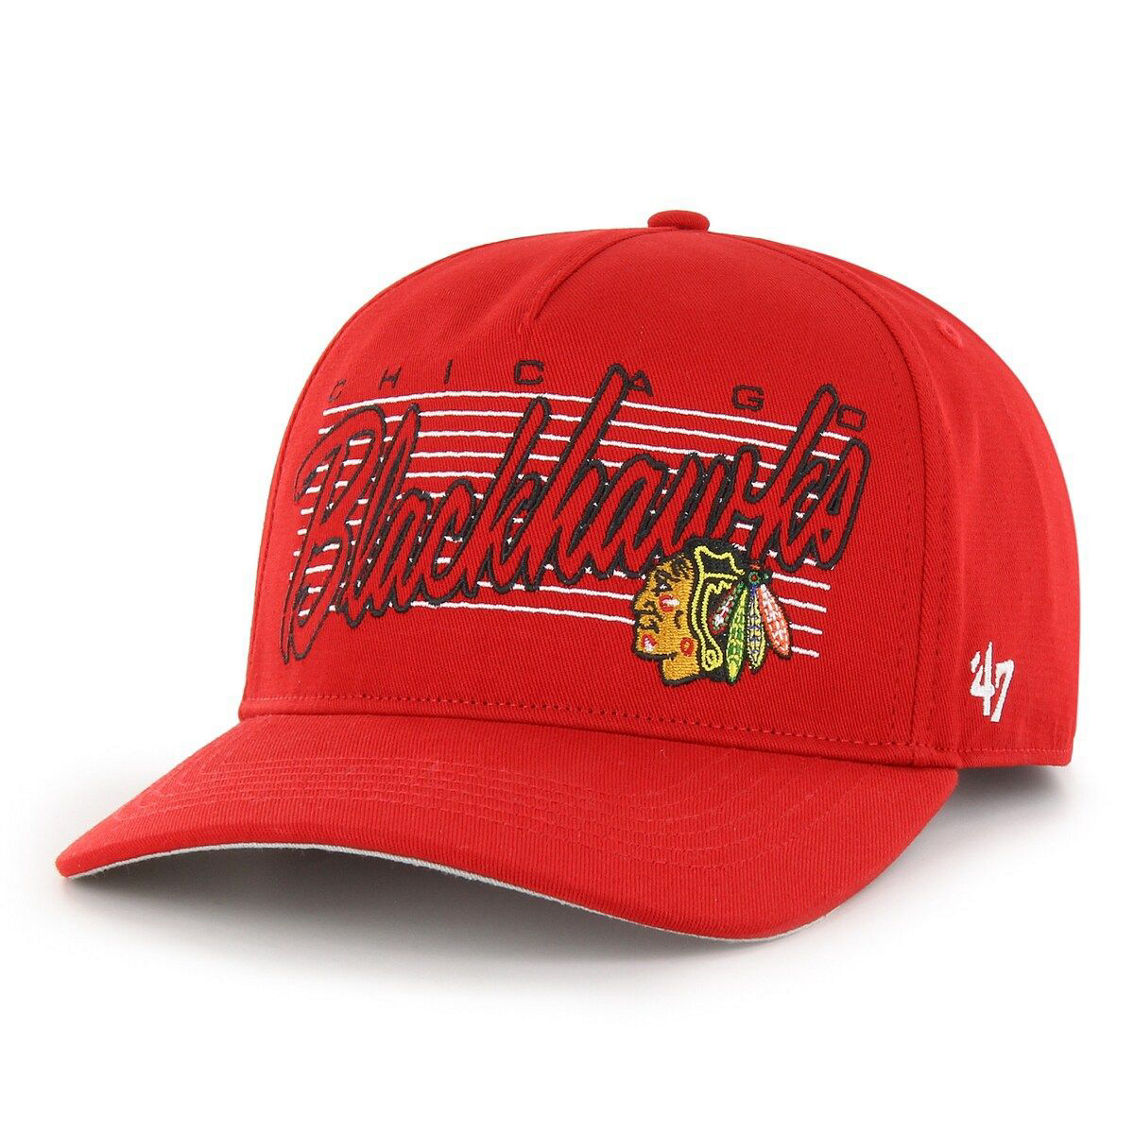 '47 Men's Red Chicago Blackhawks Marquee Hitch Snapback Hat - Image 2 of 4